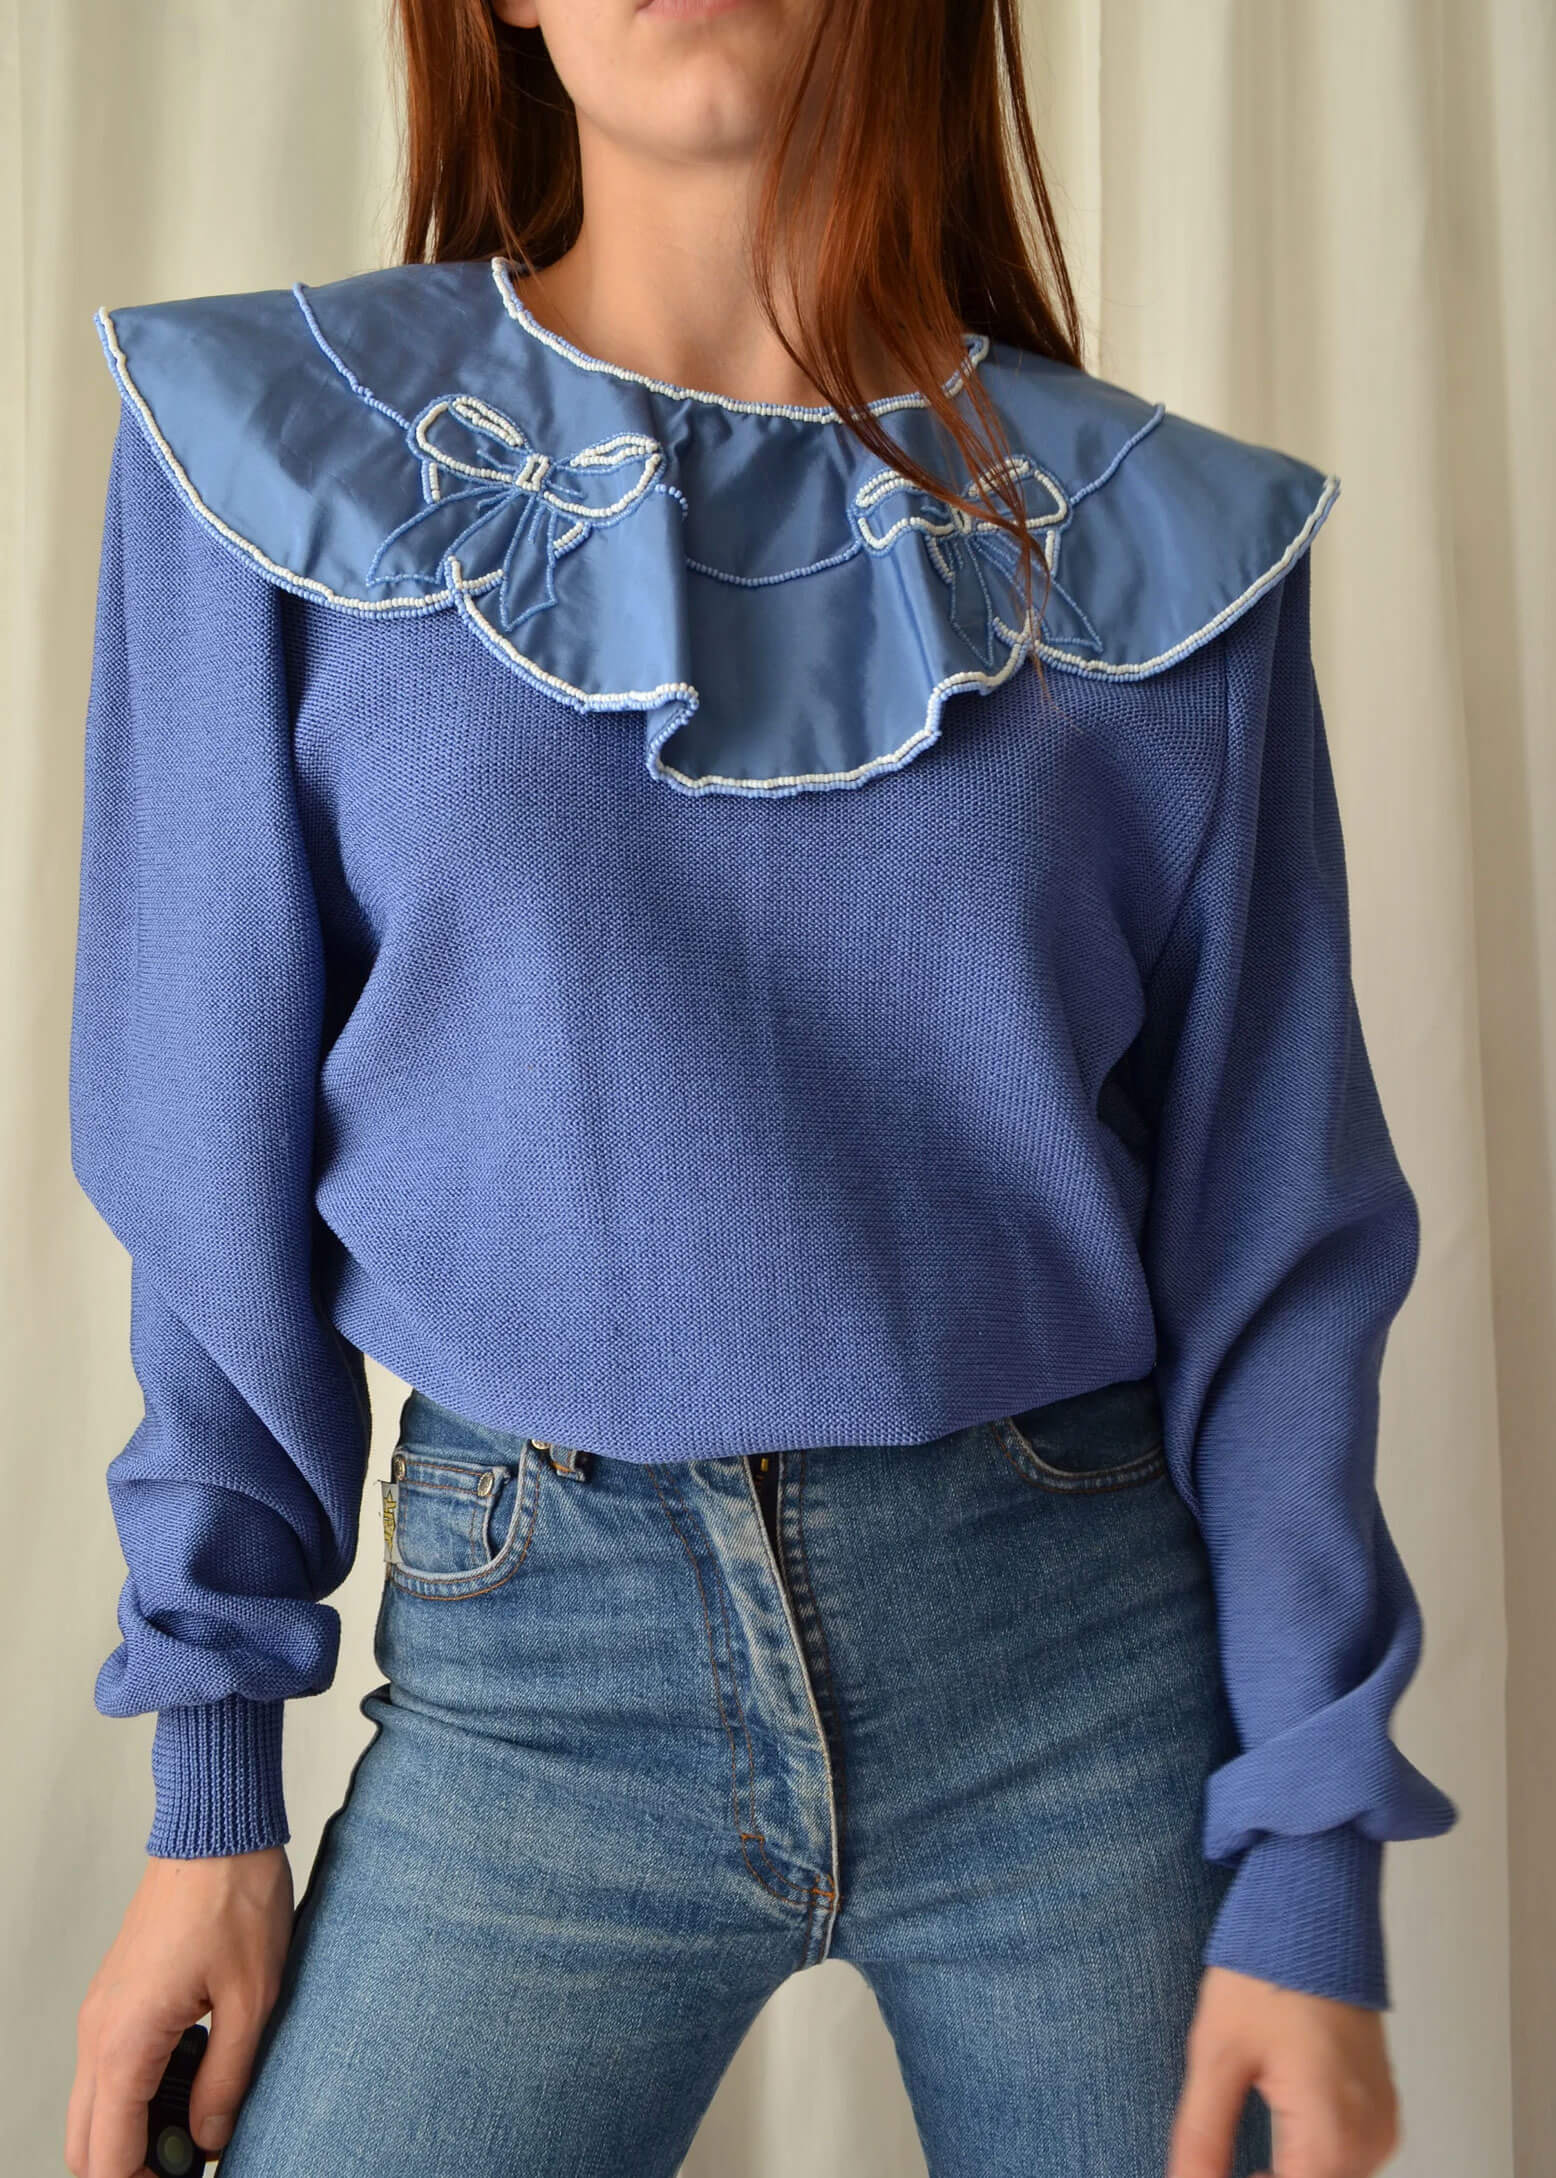 80s bow trend sweater with oversize blue collar